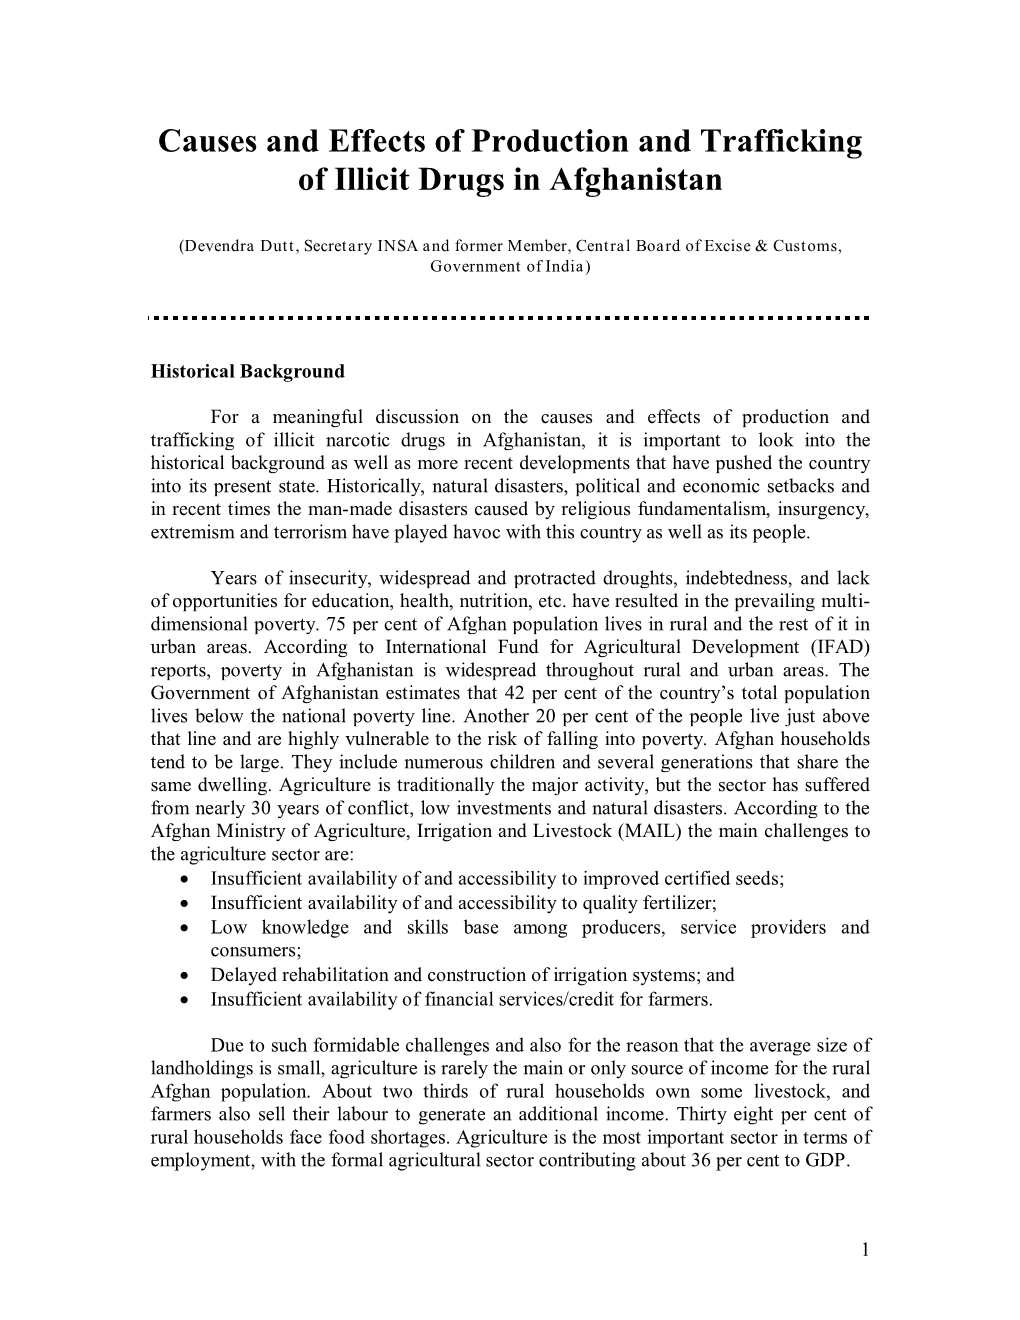 Causes and Effects of Production and Trafficking of Illicit Drugs in Afghanistan